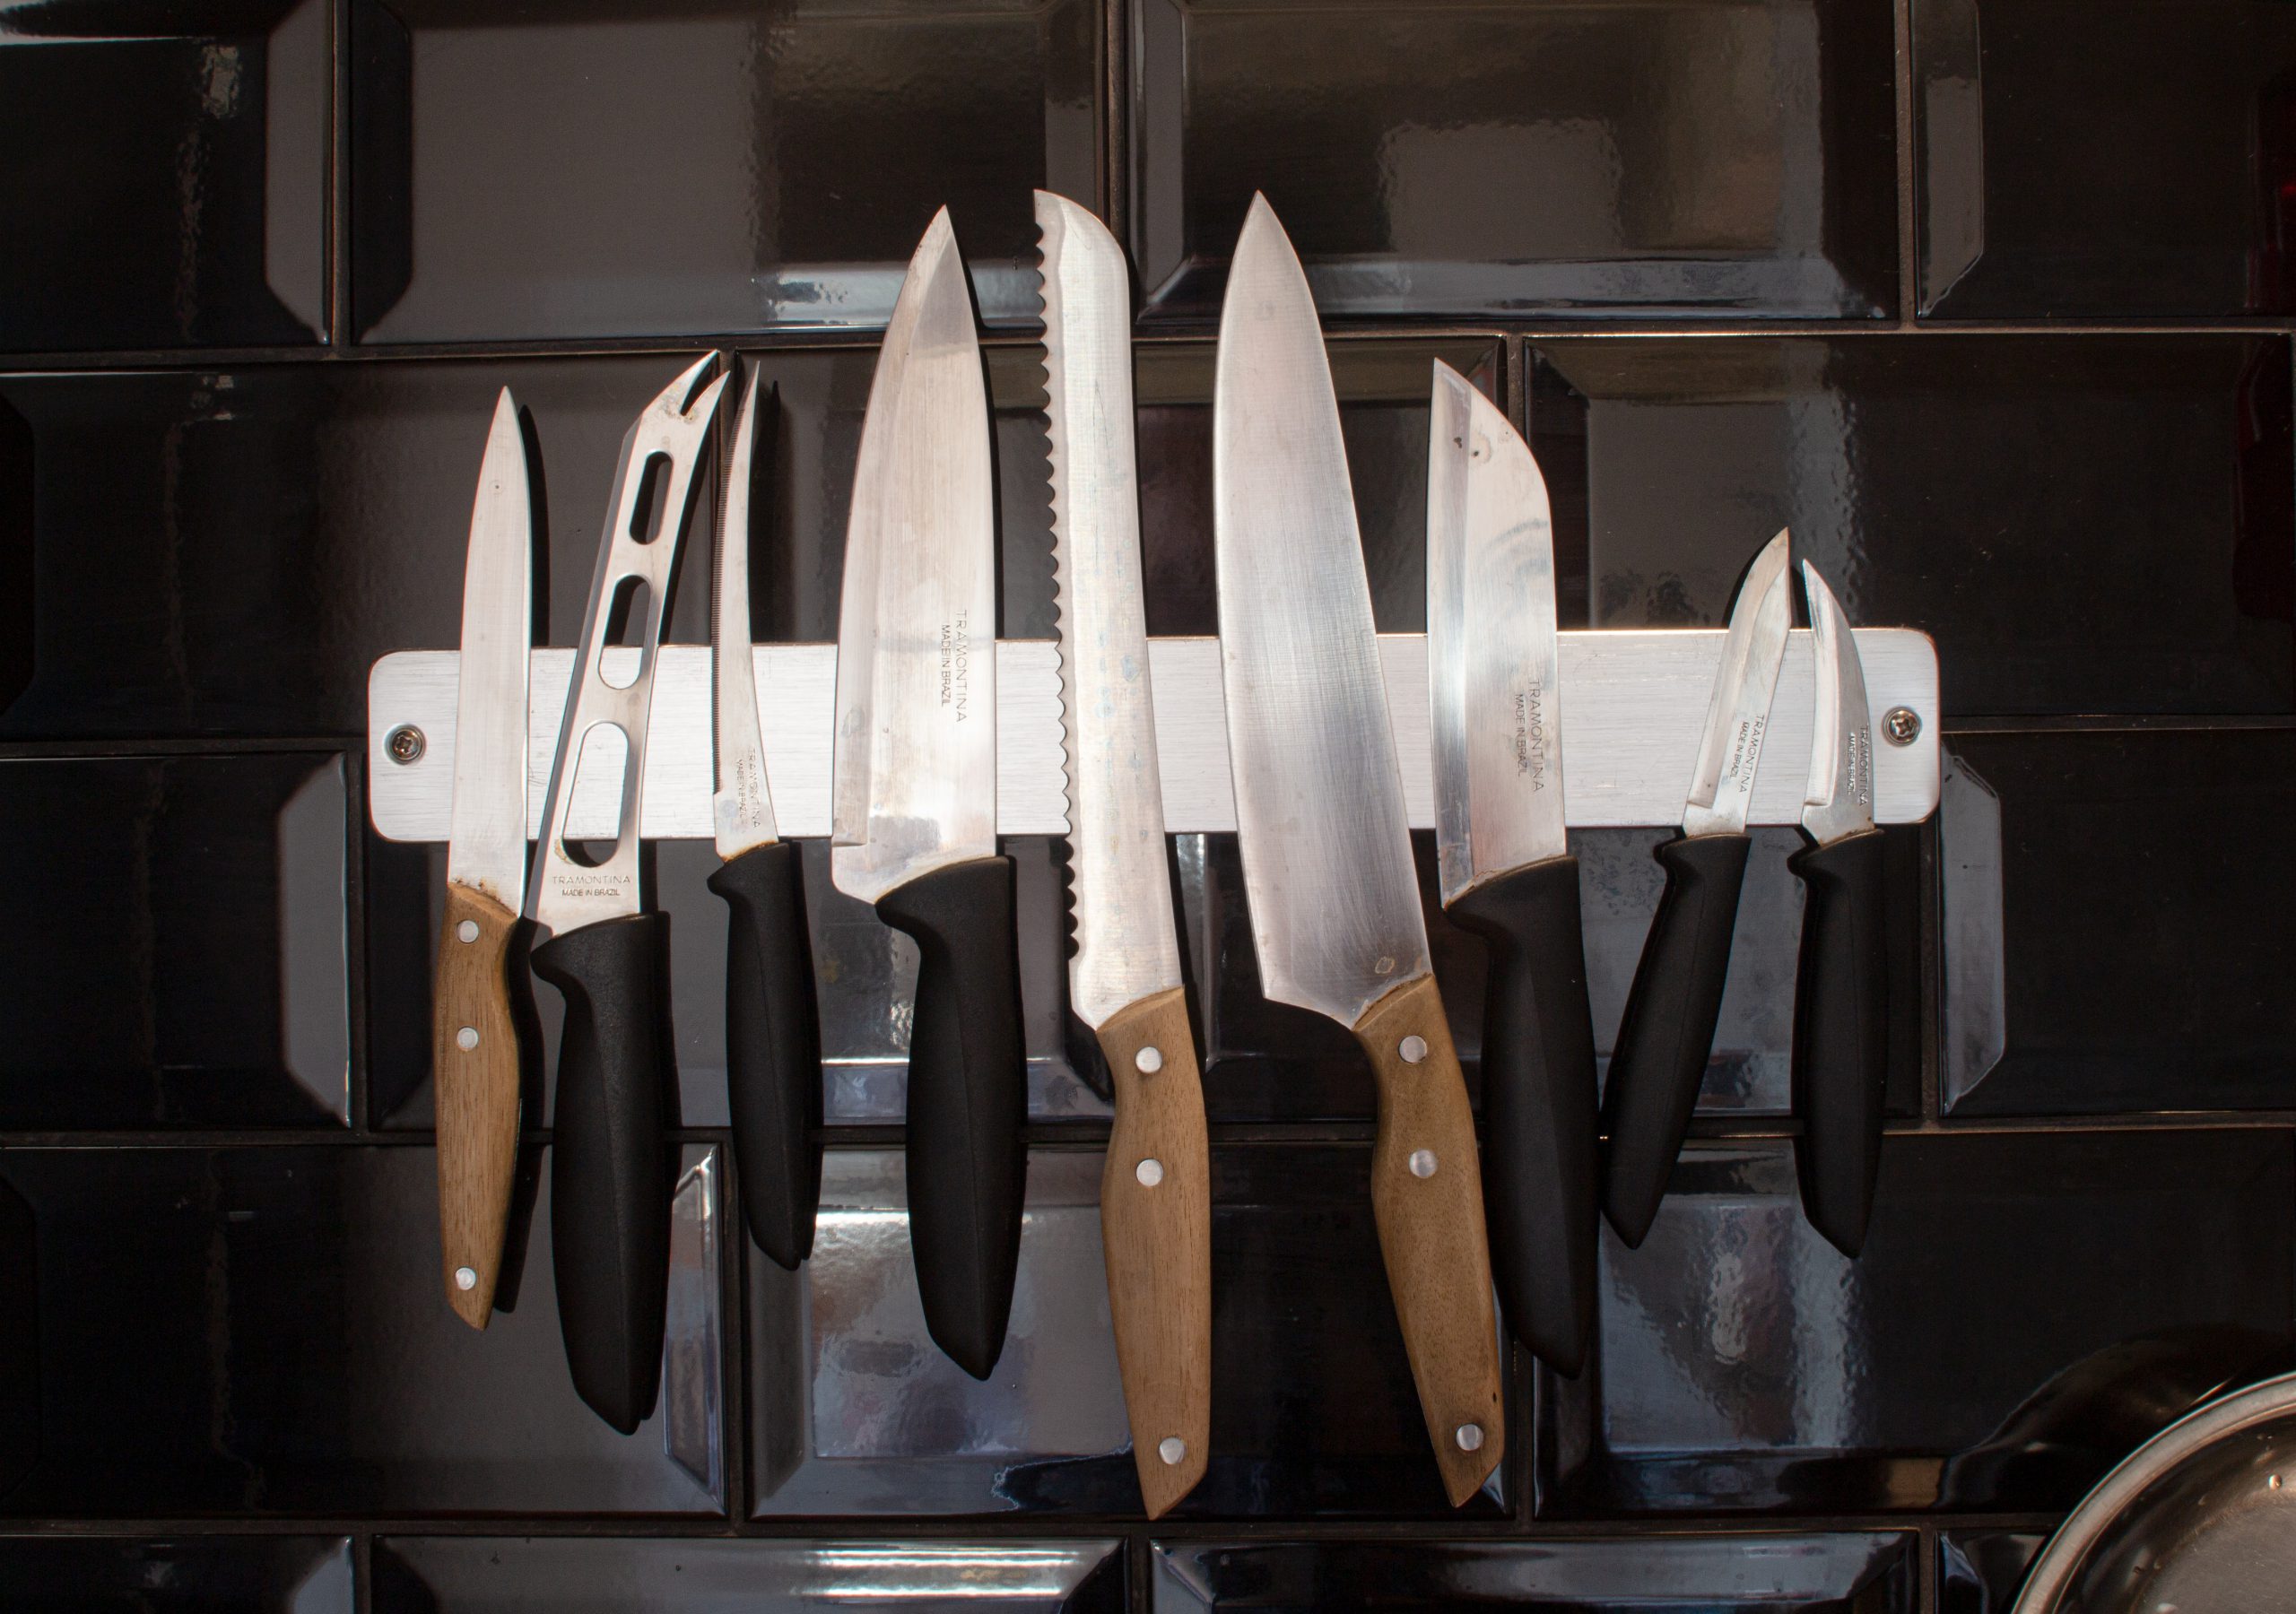 3 Ways to Store Knives in Your Kitchen - wikiHow Life